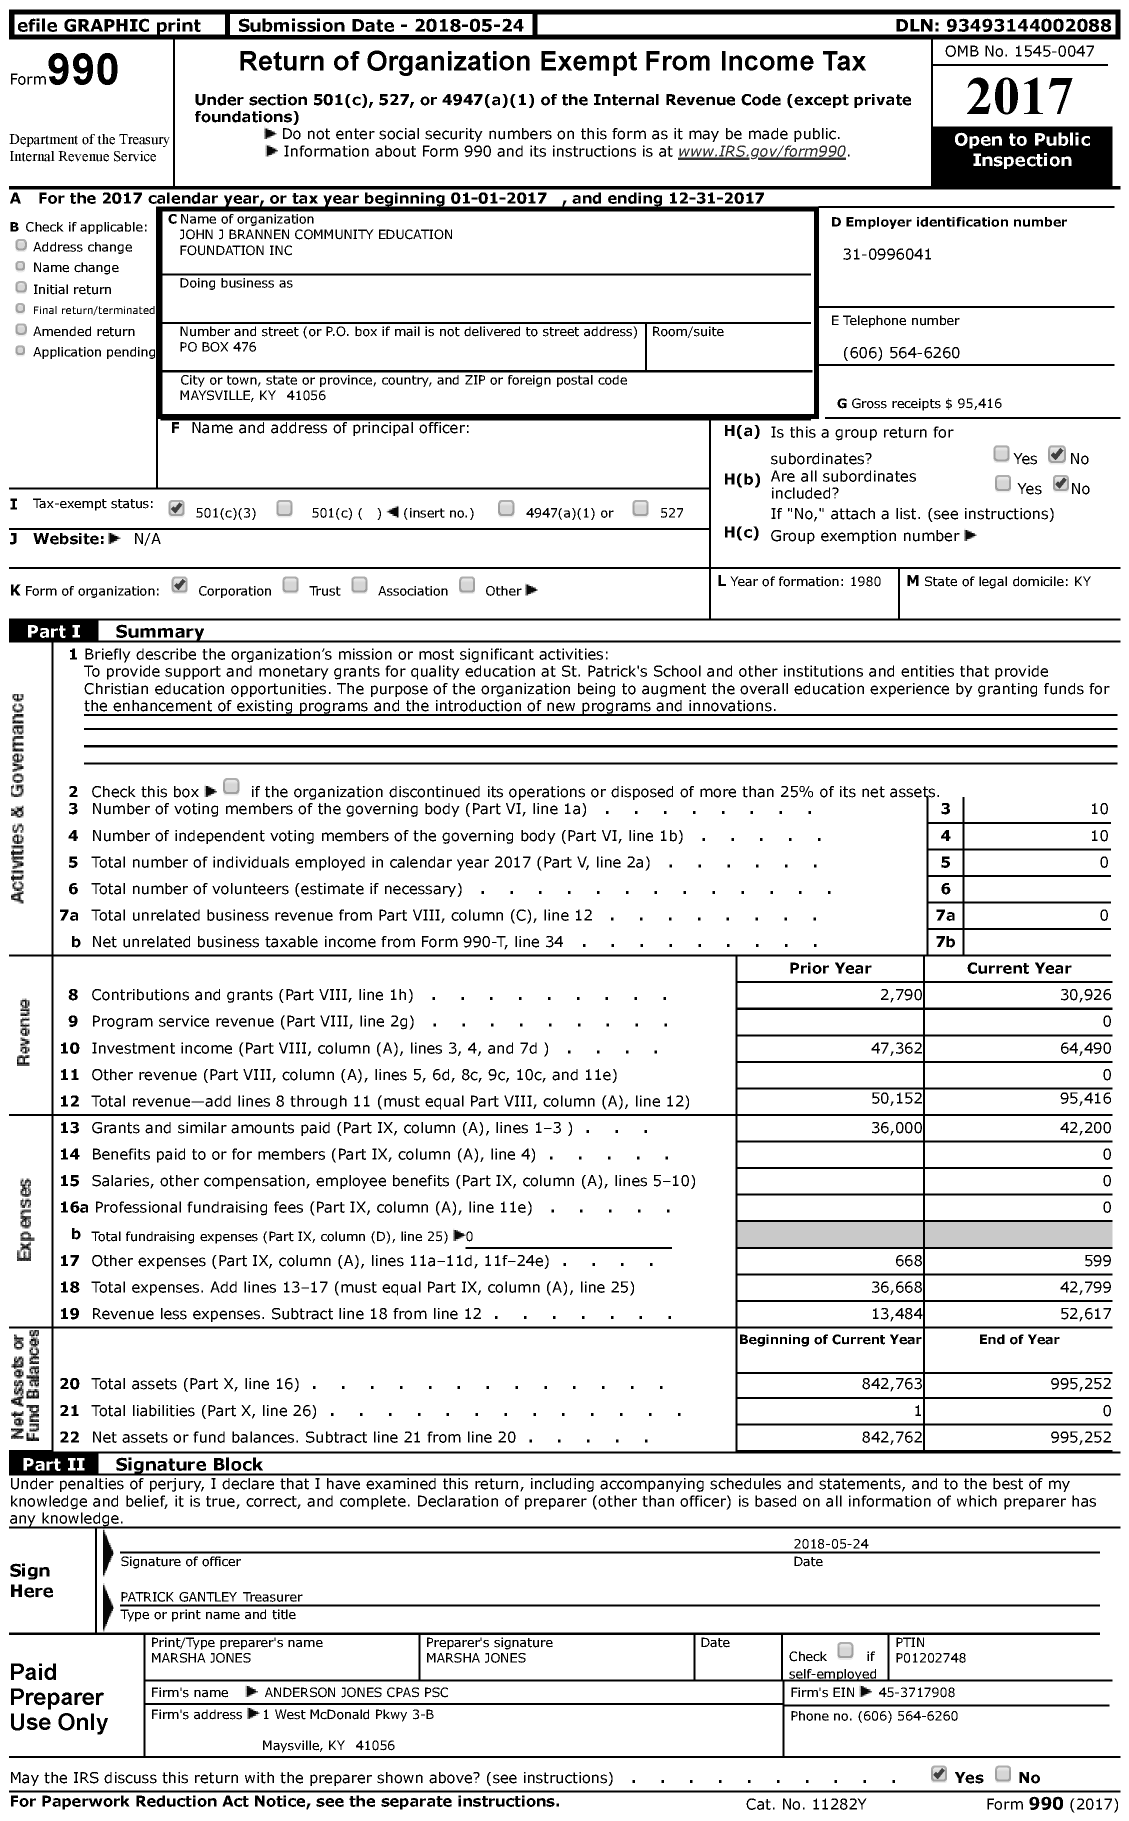 Image of first page of 2017 Form 990 for John J Brannen Community Education Foundation